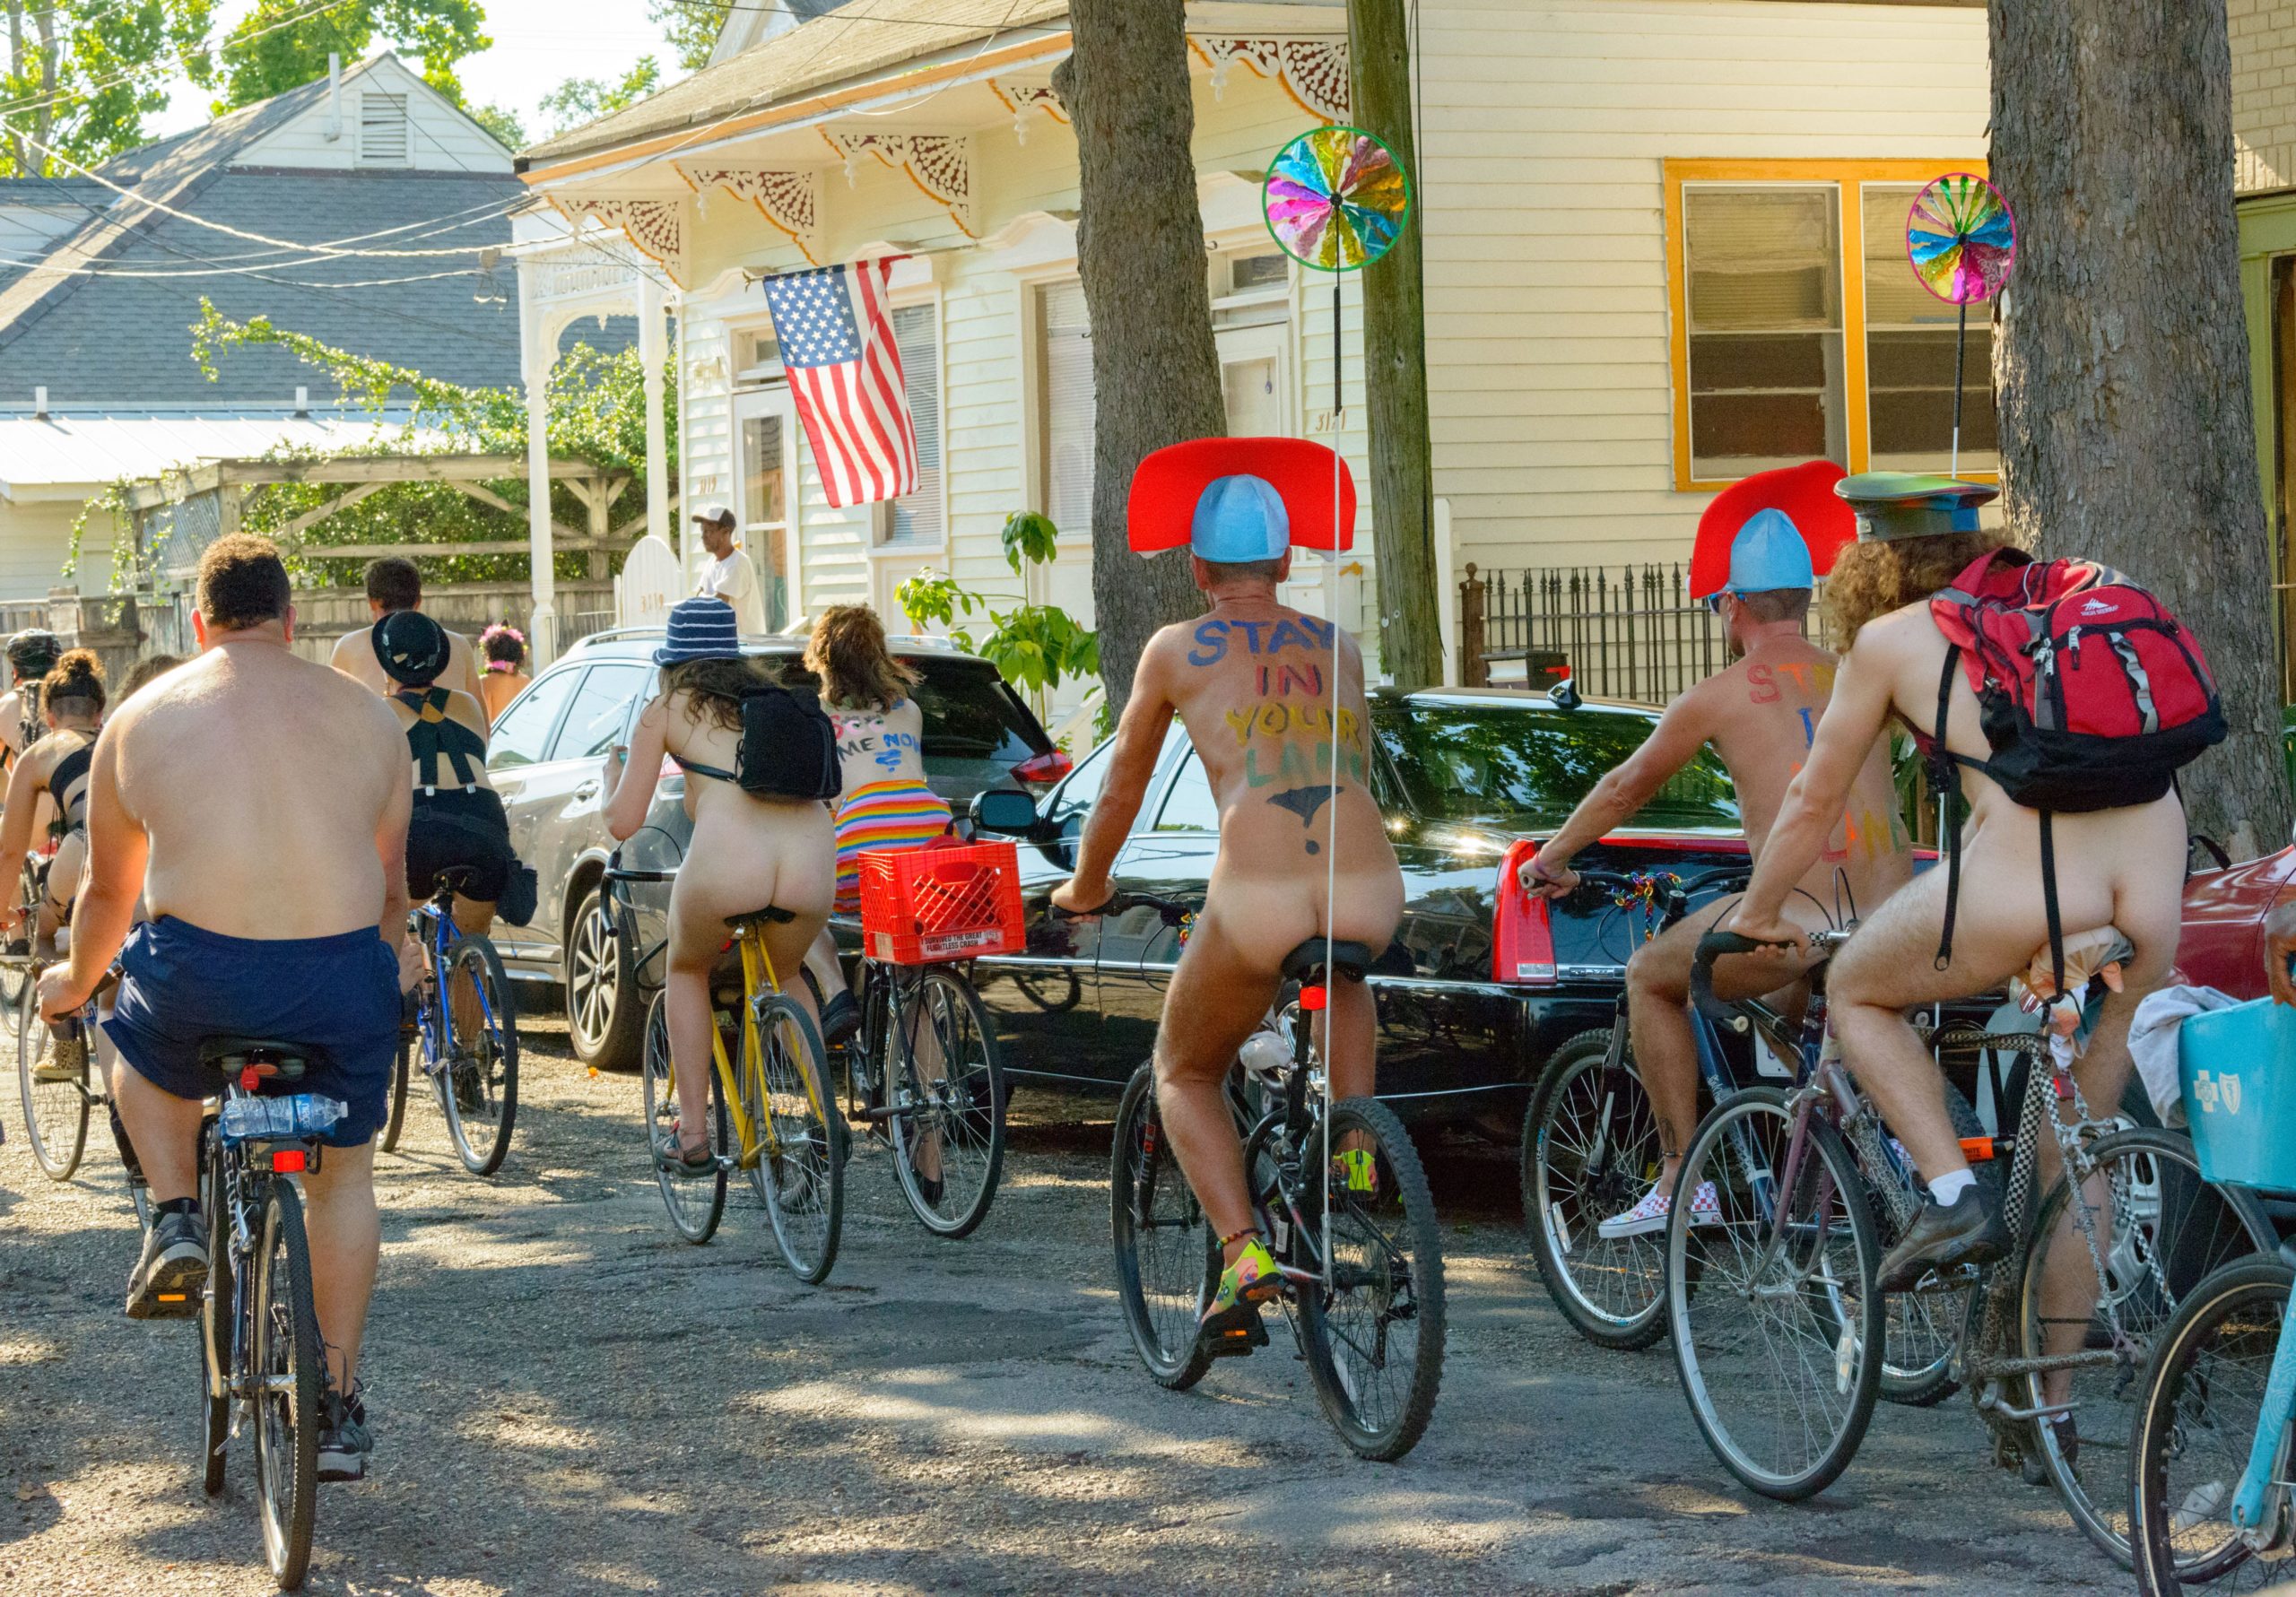 Riders in various states of undress participate in the 11th annual World Naked Bike Ride New Orleans at Markey Park in the Bywater before continuing on to the French Quarter Saturday, June 8, 2019.
The group states on its website that the purpose of the ride is to promote a cleaner, safer, body-positive world to the masses in a free, non-sexual, fun bike ride. ‘Our mission is to take to the streets riding nude as the best way of defending our dignity as humans on bikes. We expose just how vulnerable we are as cyclist on our own city streets. We also ride to protest the world's oil dependency, mainly cars, that negatively impacts the environment on this planet.’ Photo by Matthew Hinton